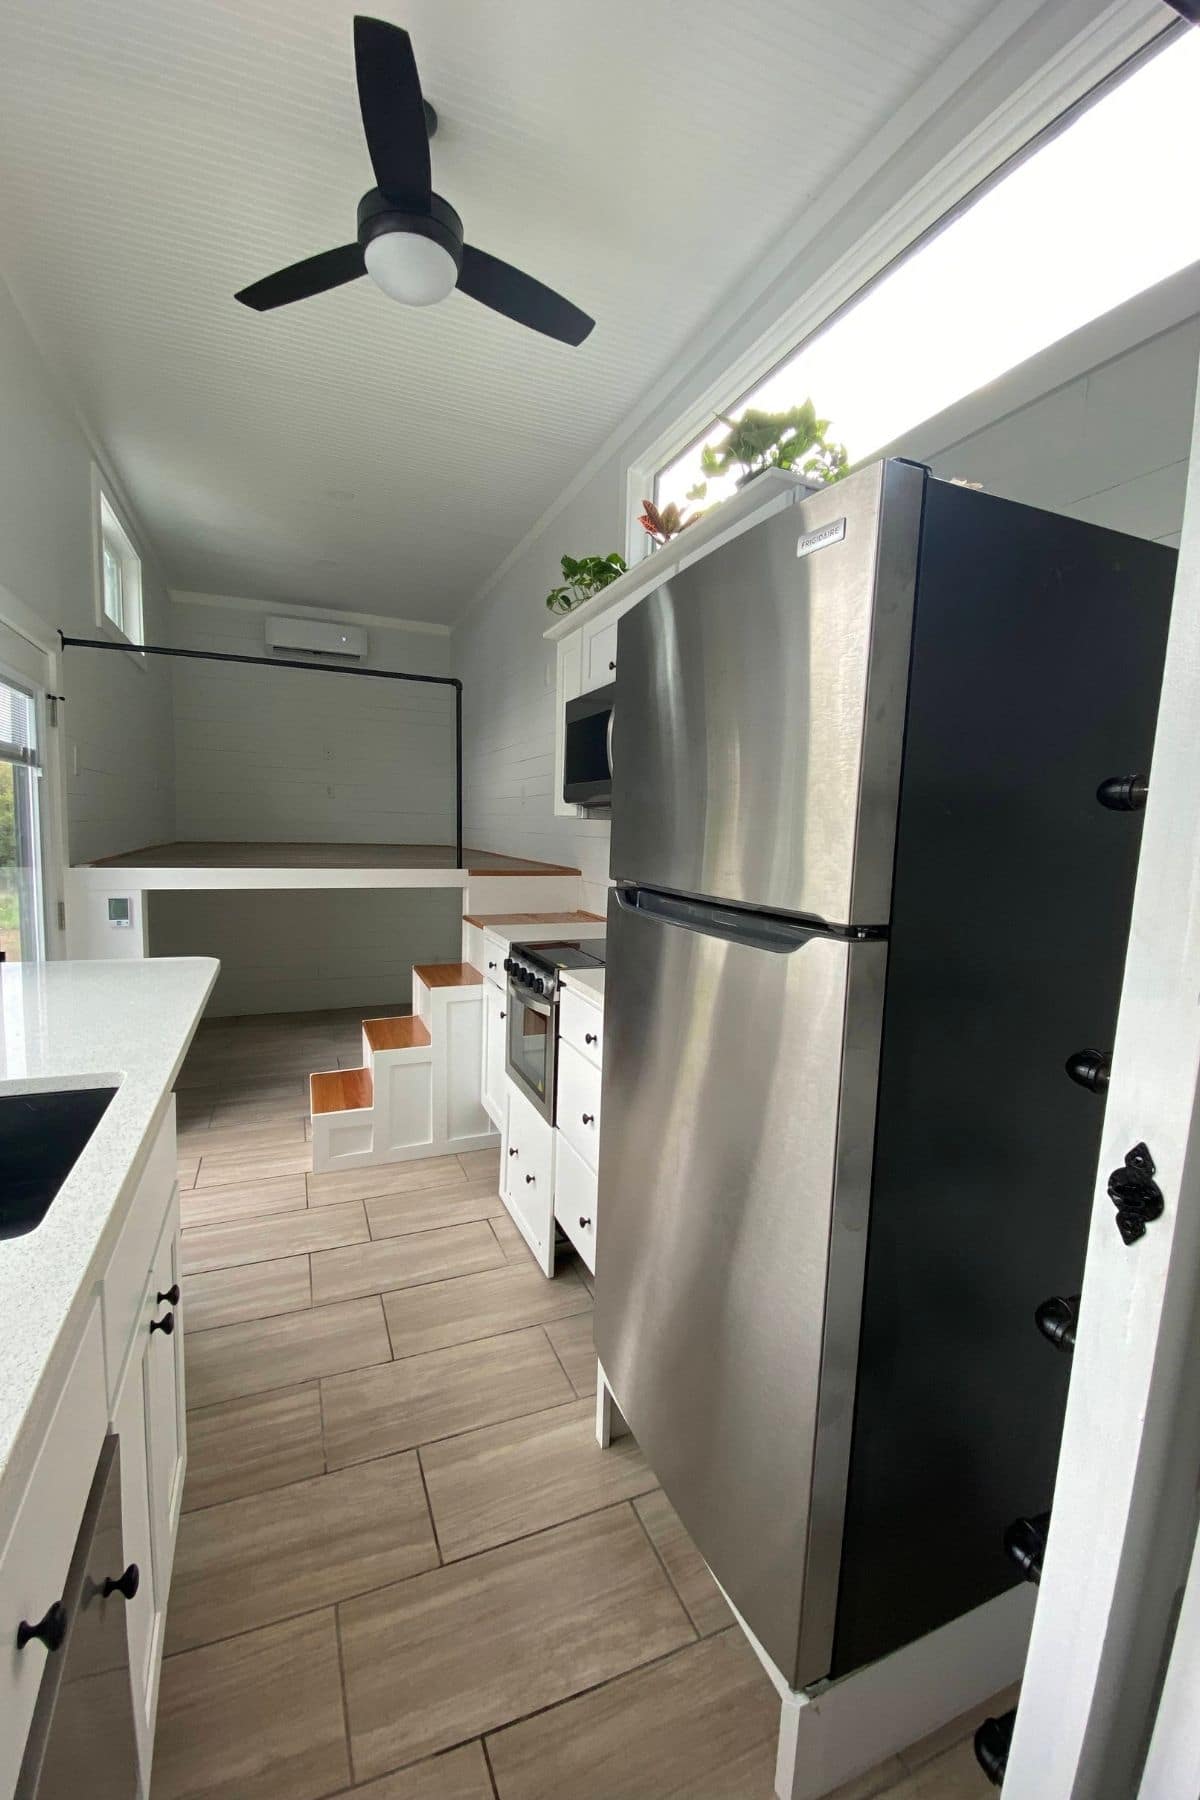 stainless steel refrigerator in foreground with white cabinets in background